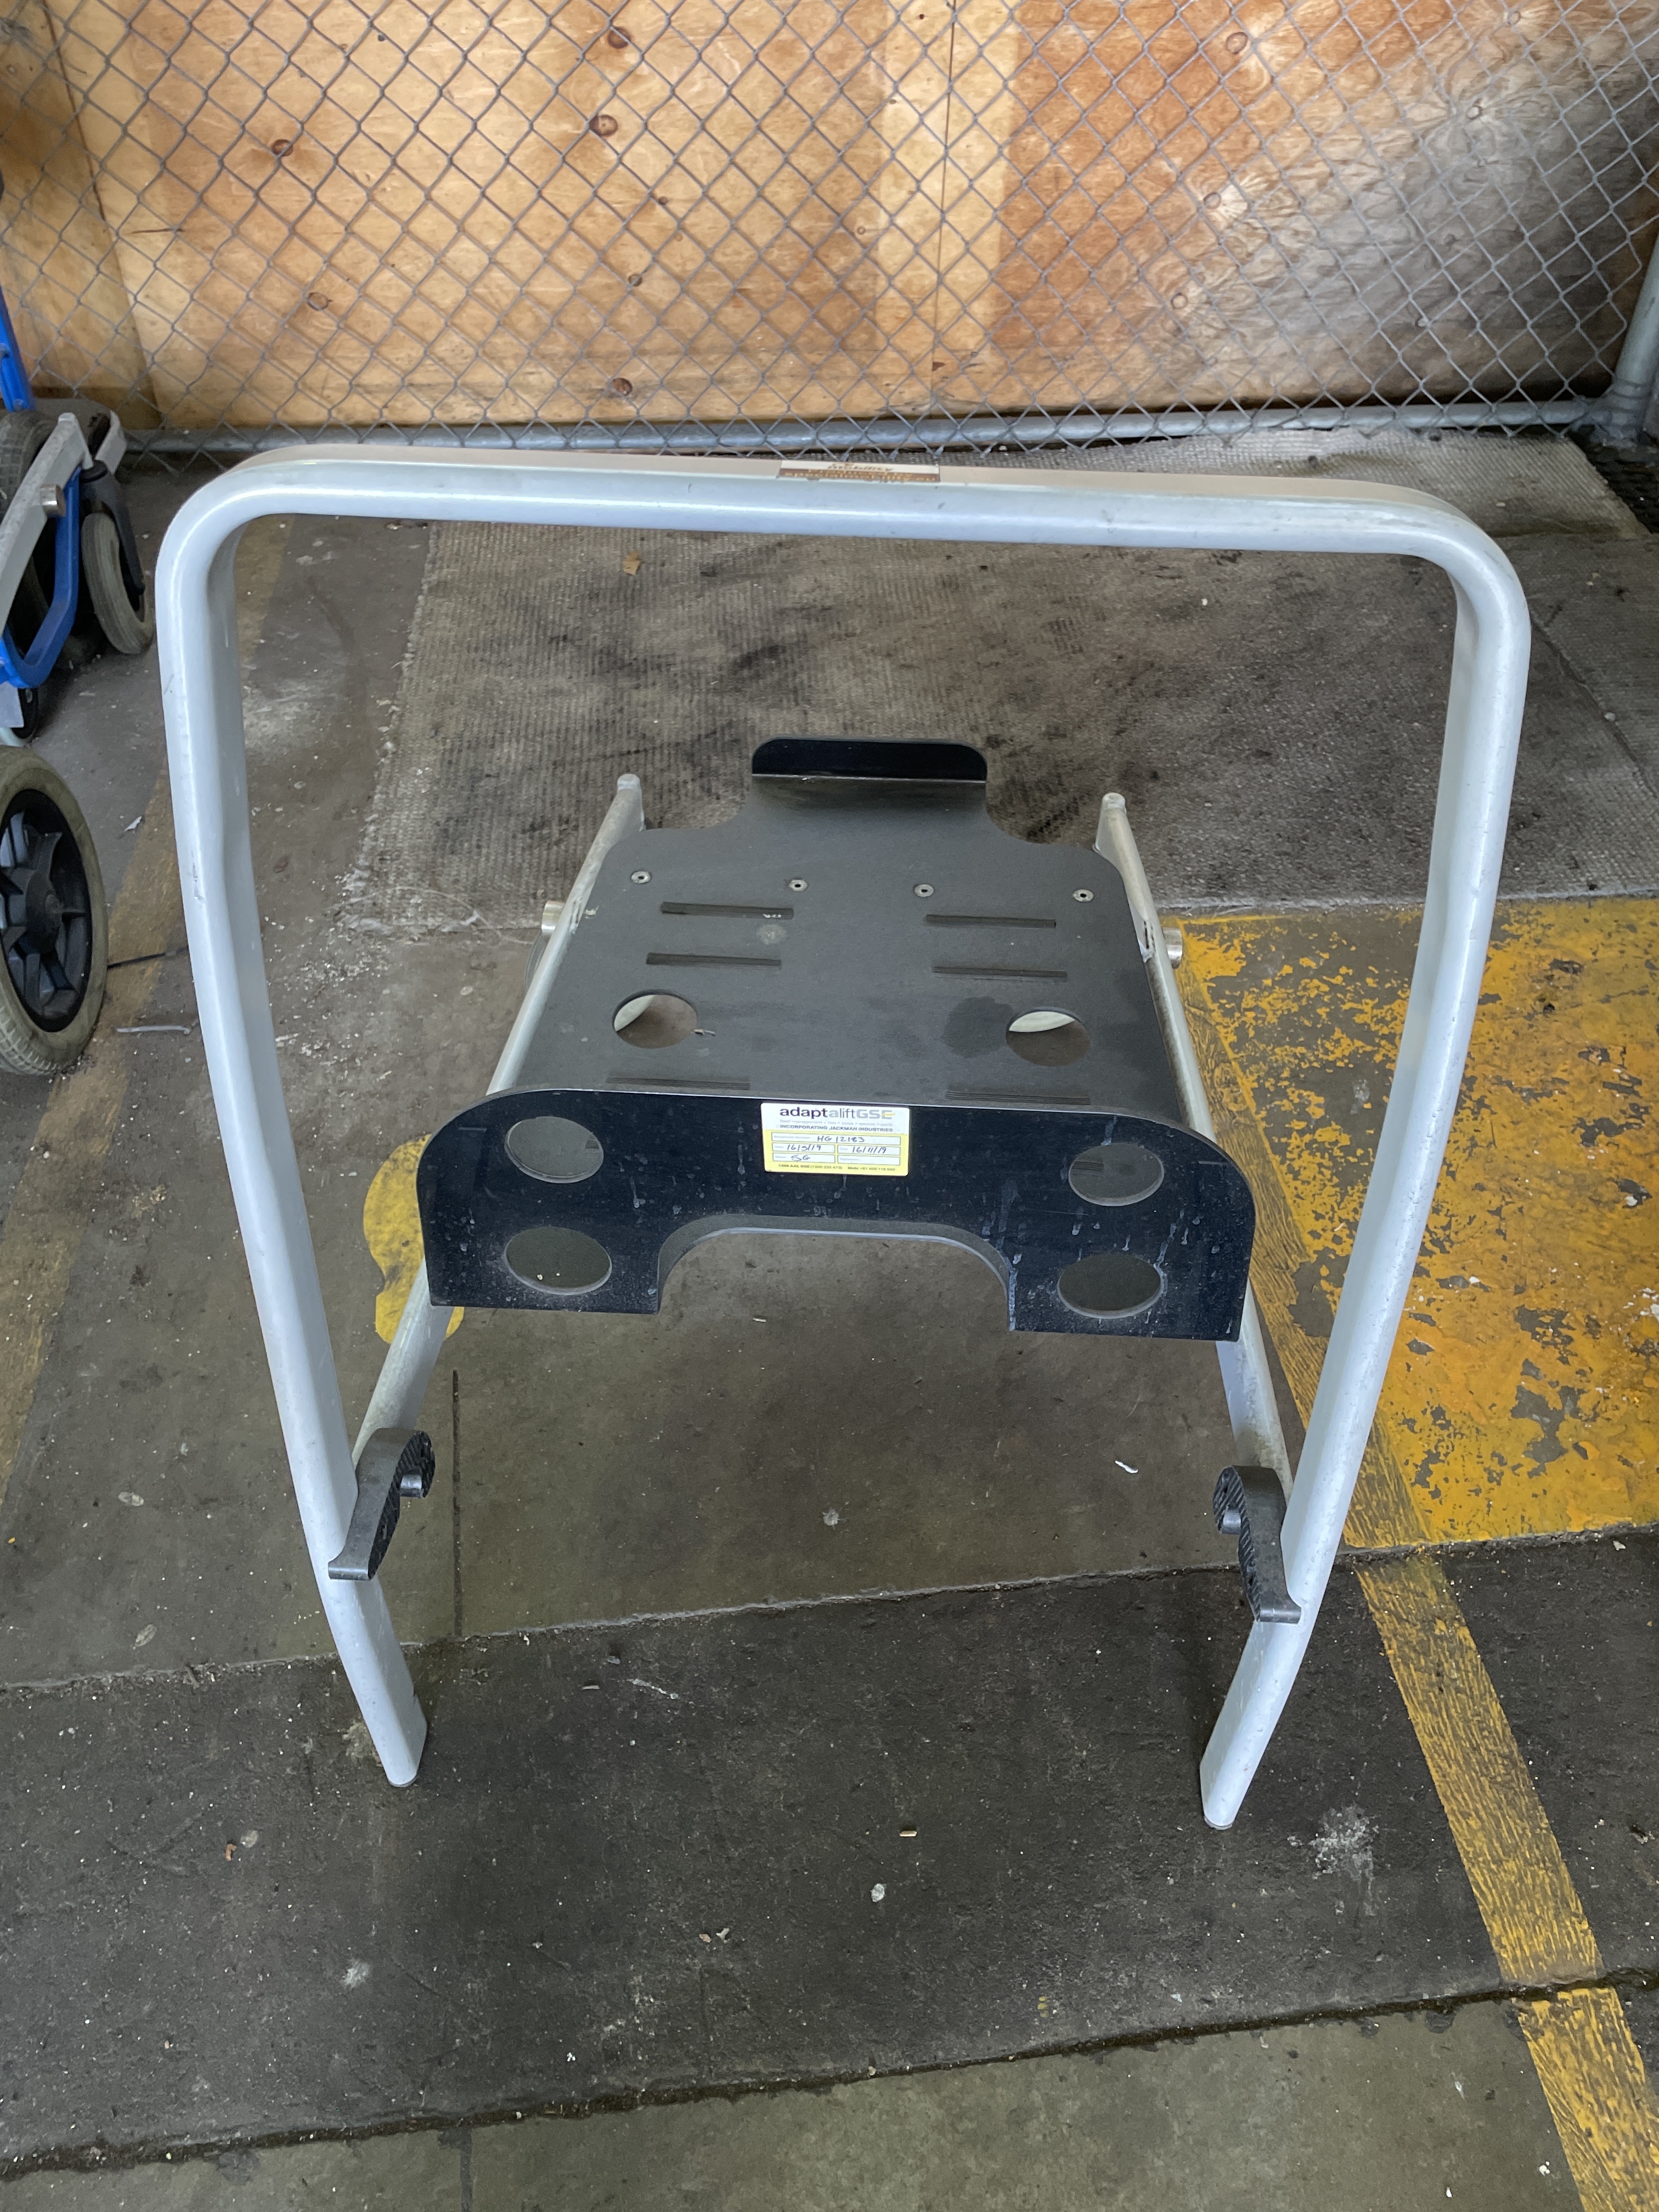 Used forklift: New SPECIALMOBILITY Luggage Trolley with Fixations ACCESS EQUIP